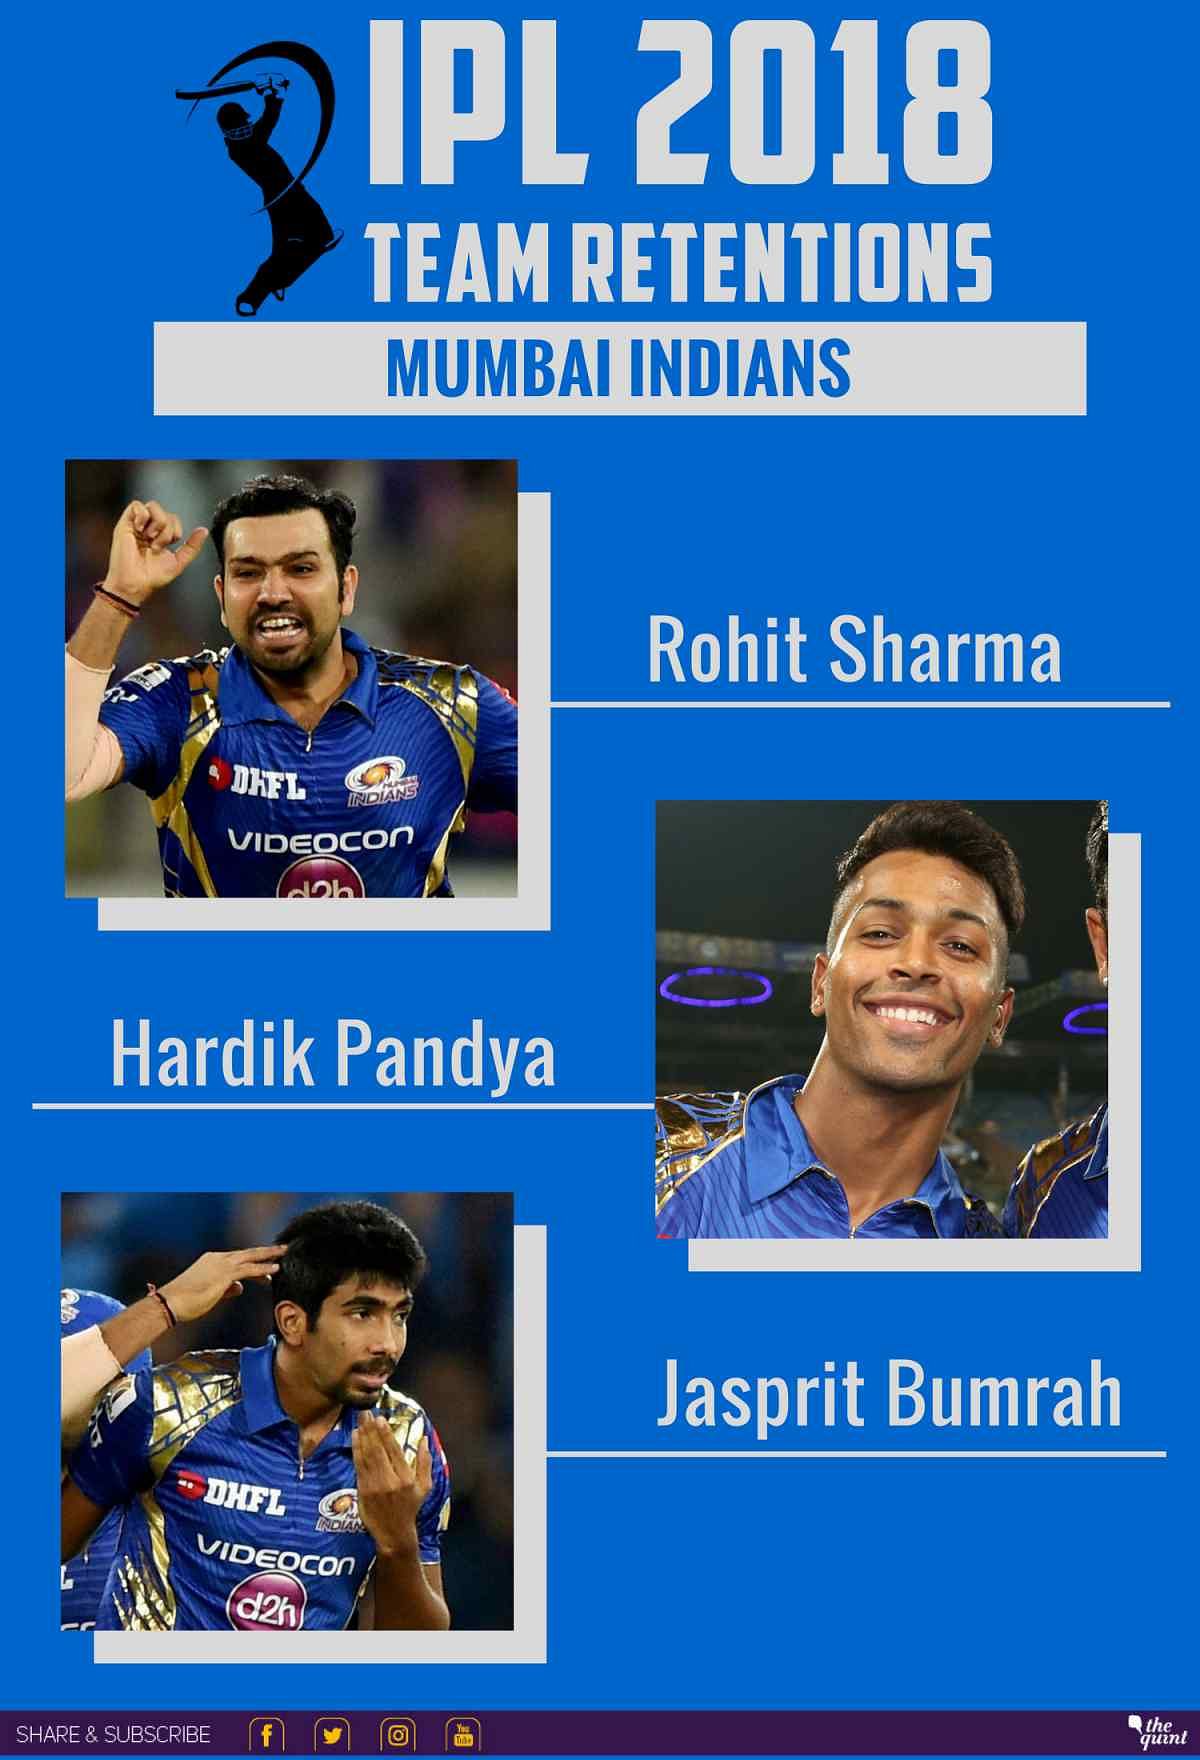 After retaining three players, Mumbai Indians have a salary cap of Rs 47 crore remaining for the auction.